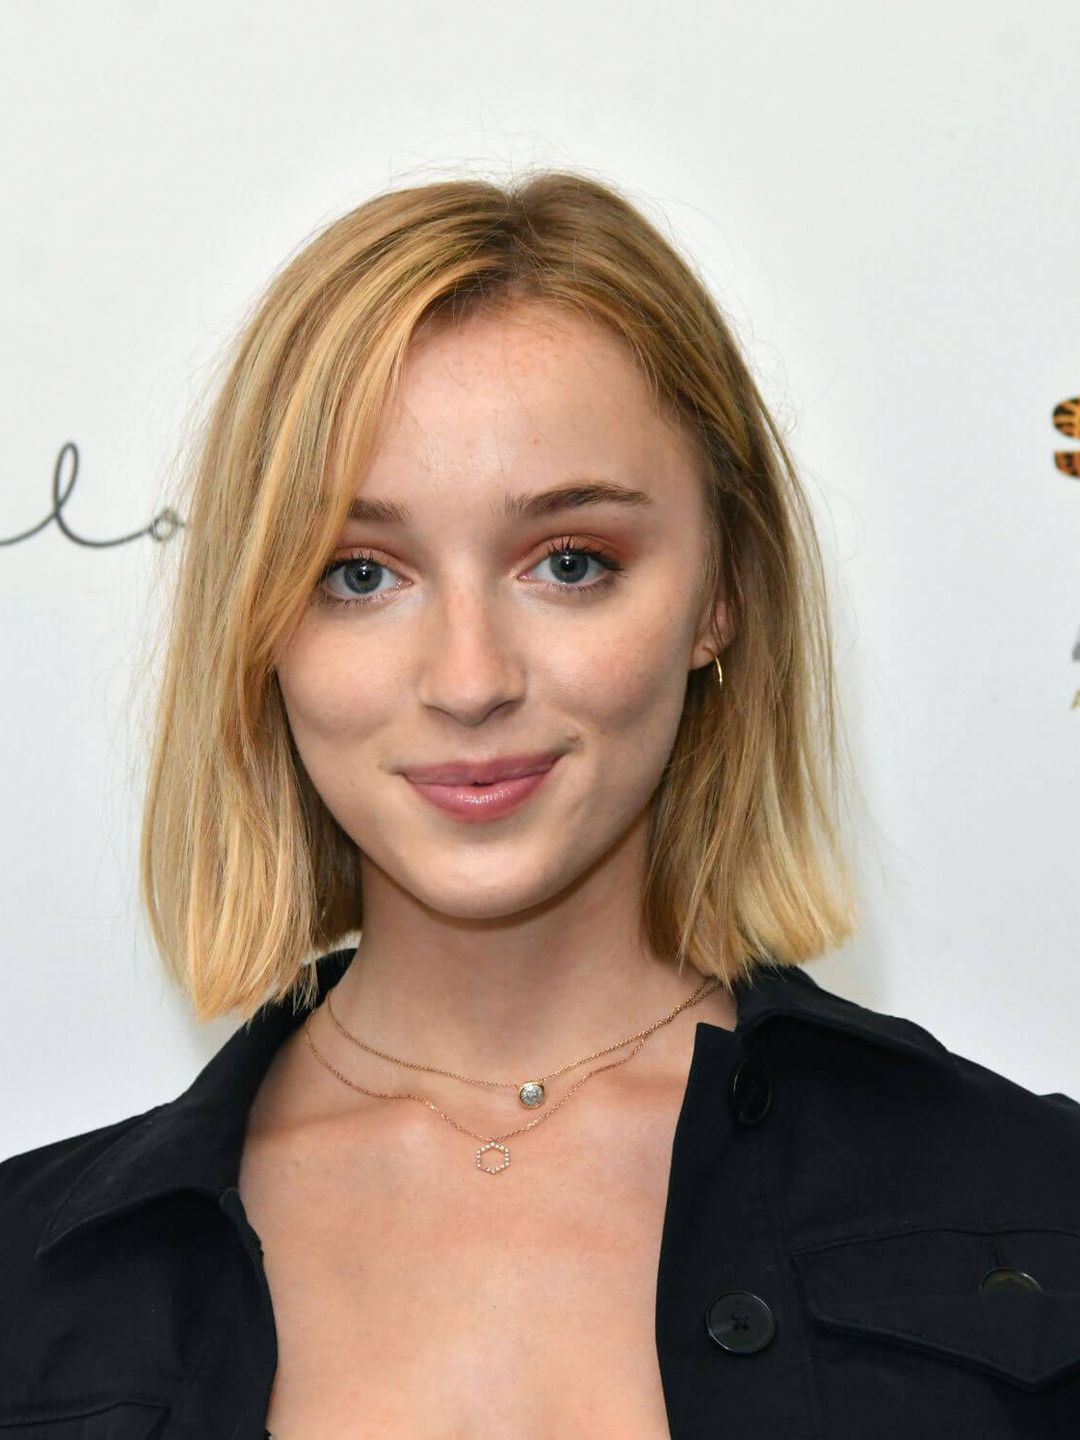 Phoebe Dynevor where is she now